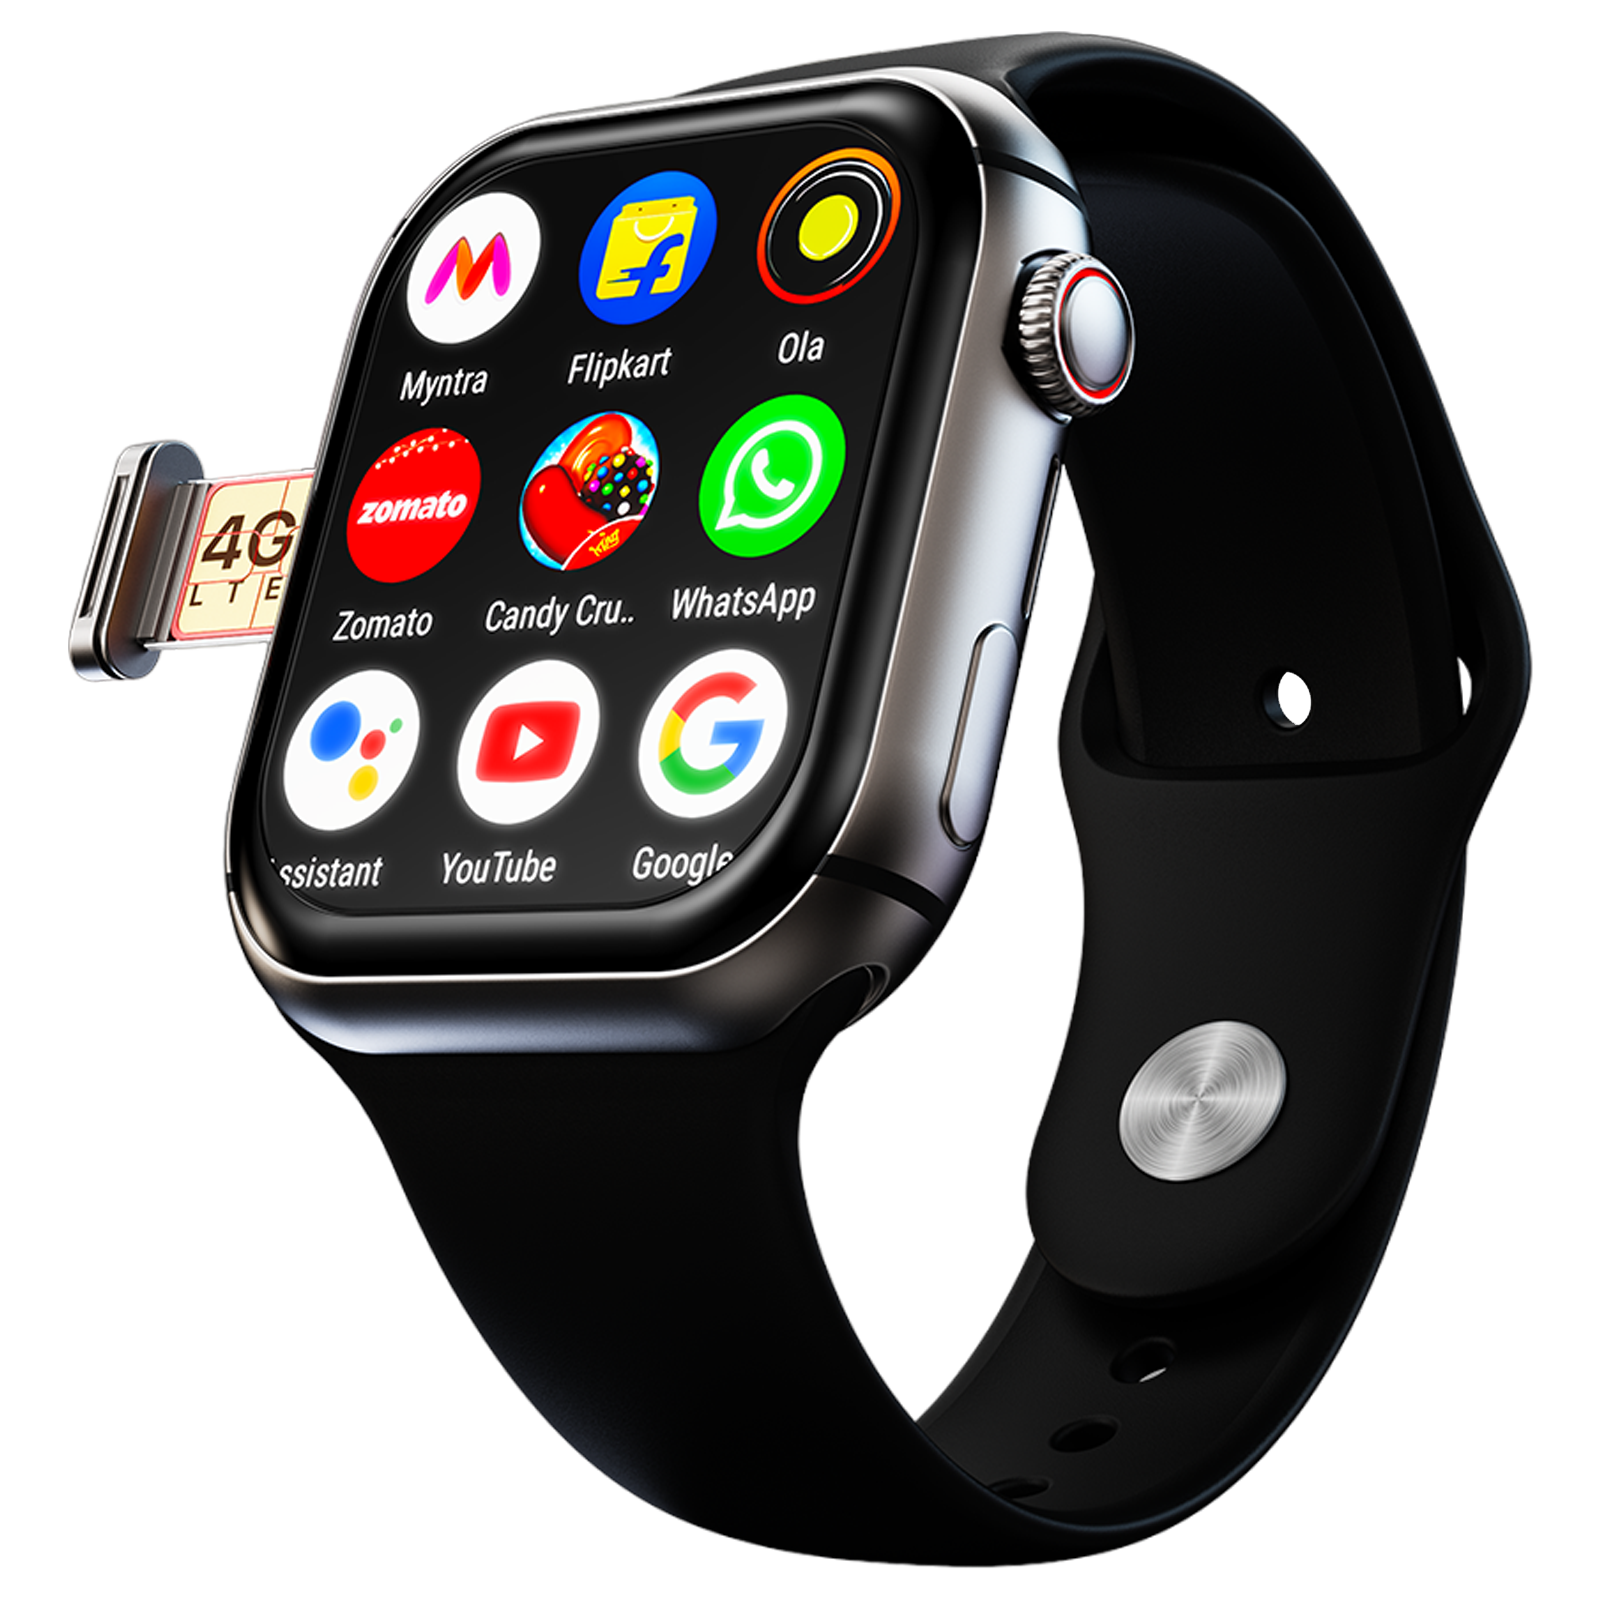 Buy Lte Smart Watches Online at Best Prices